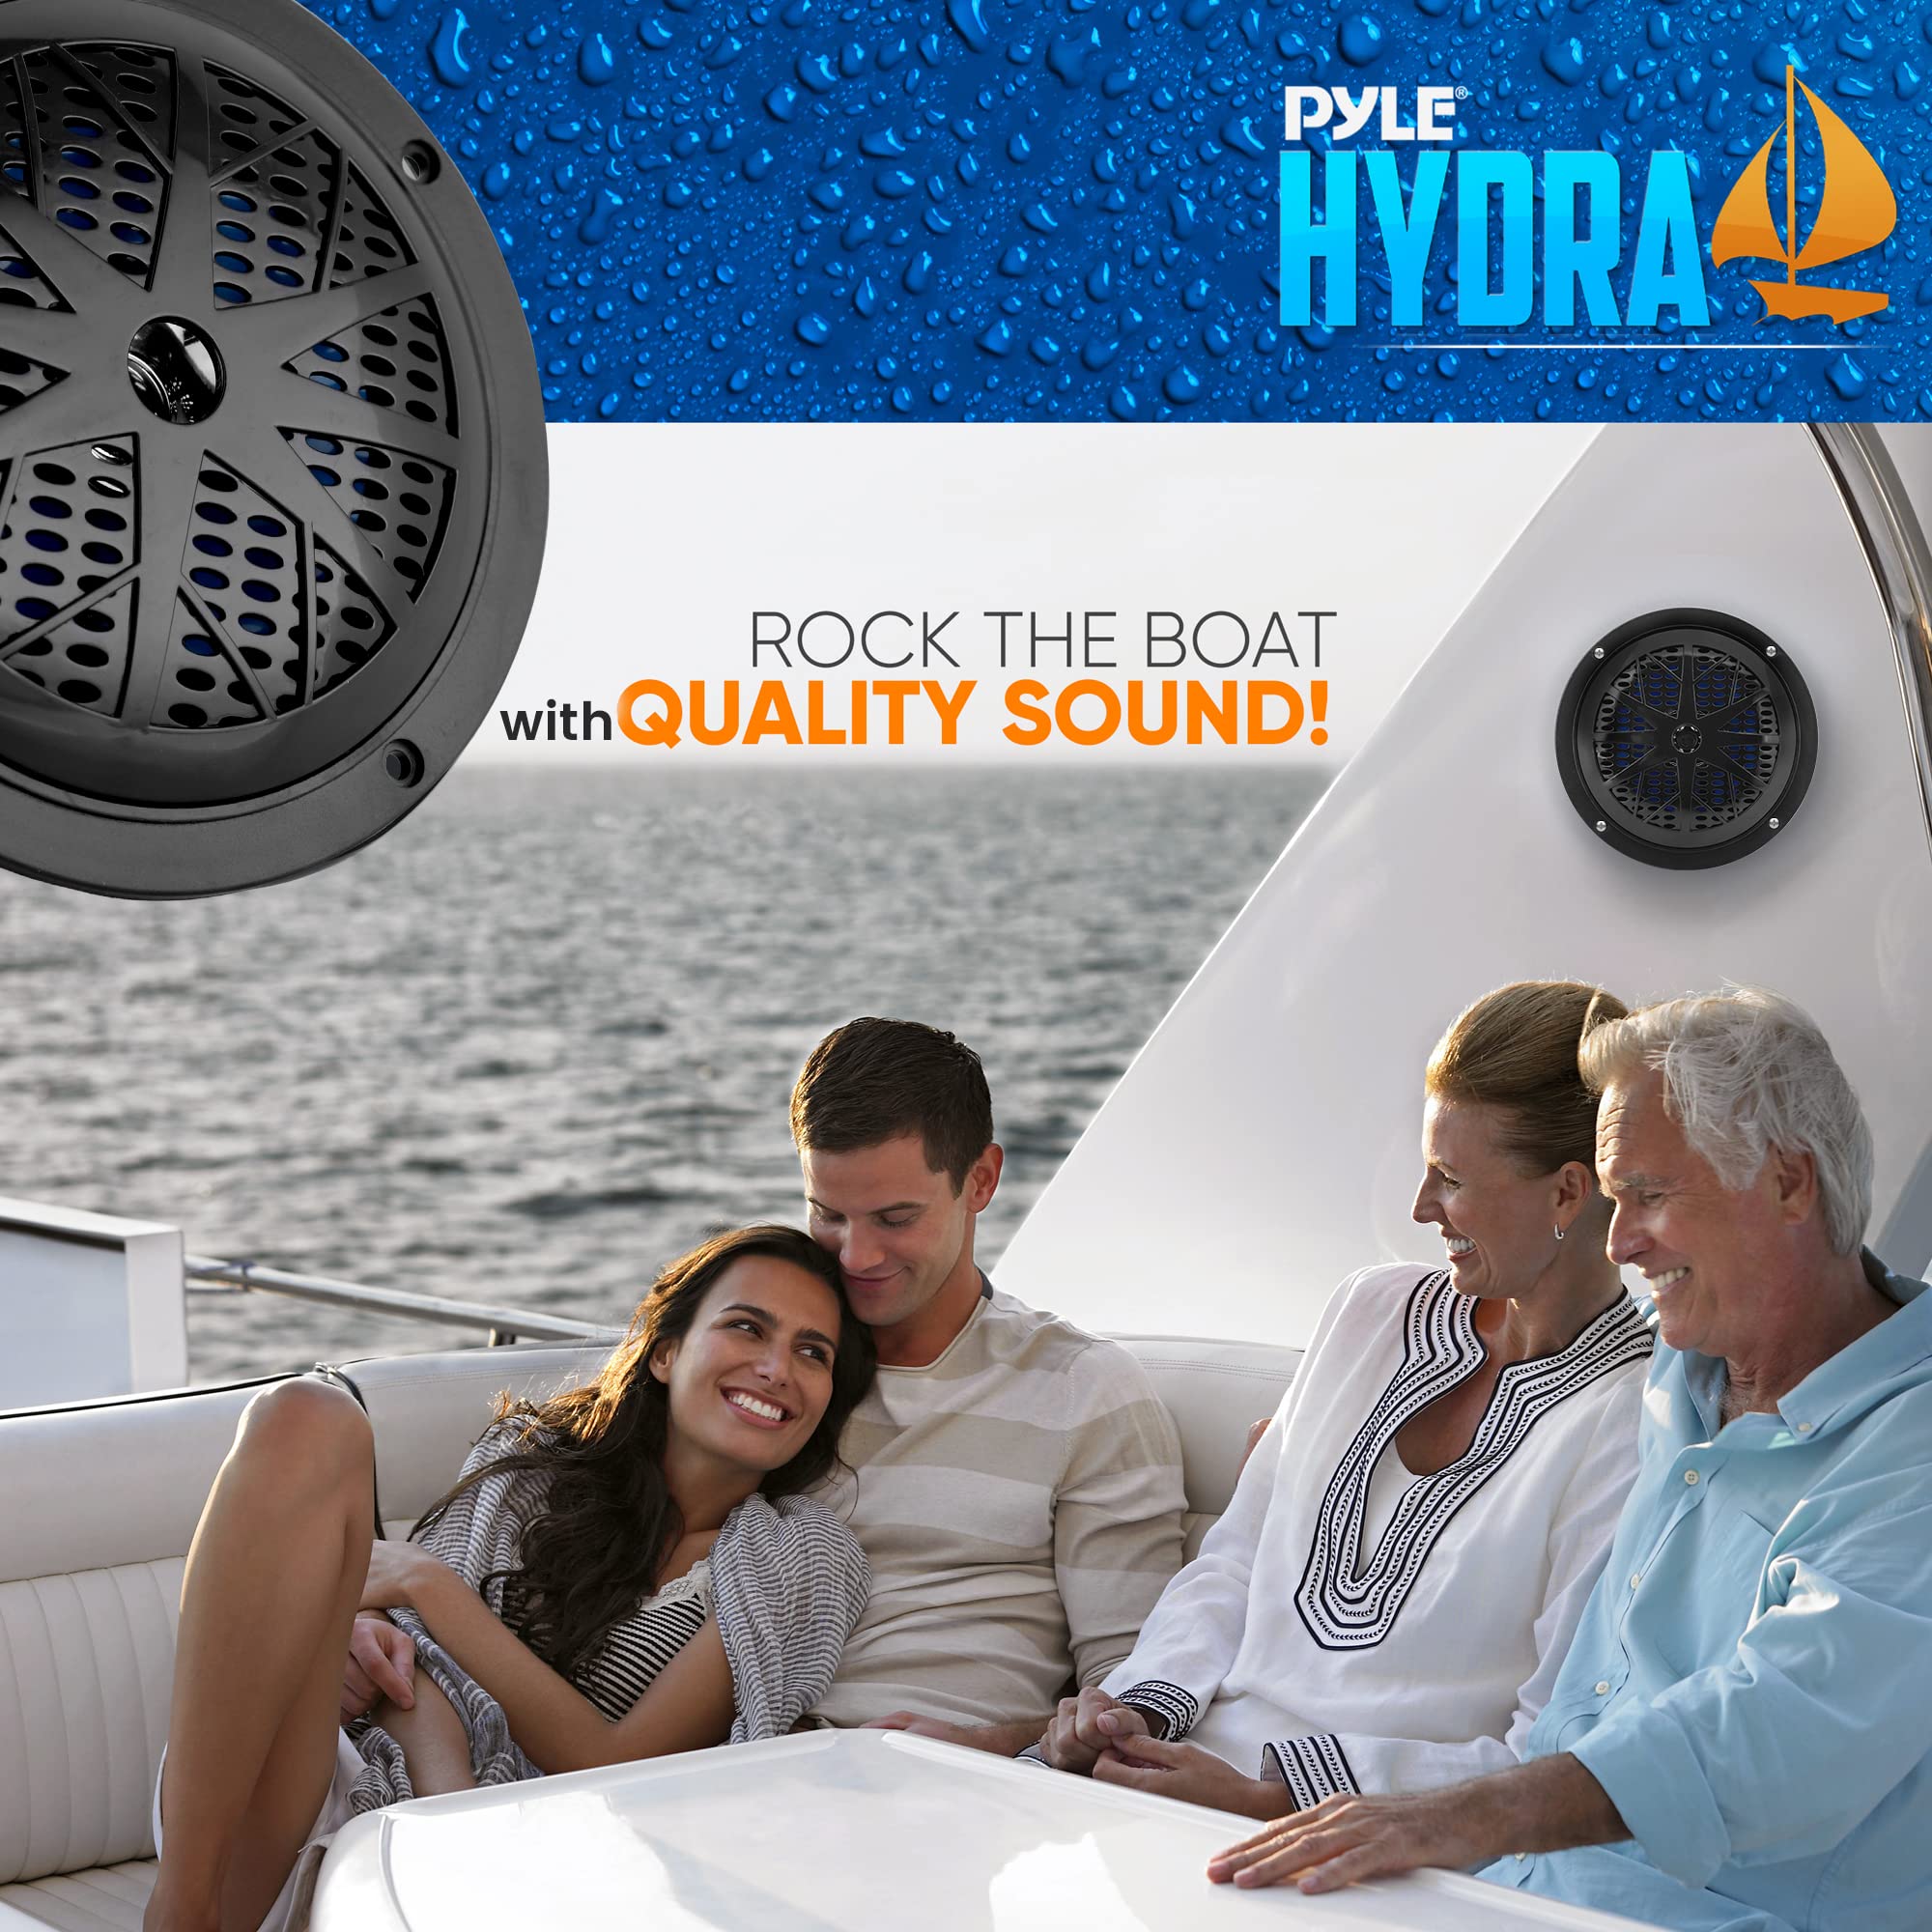 Pyle 5.25 Inch Dual Marine Speakers - 2 Way Waterproof and Weather Resistant Outdoor Audio Stereo Sound System with 100 Watt Power, Polypropylene Cone and Cloth Surround - 1 Pair - PLMR51B (Black)